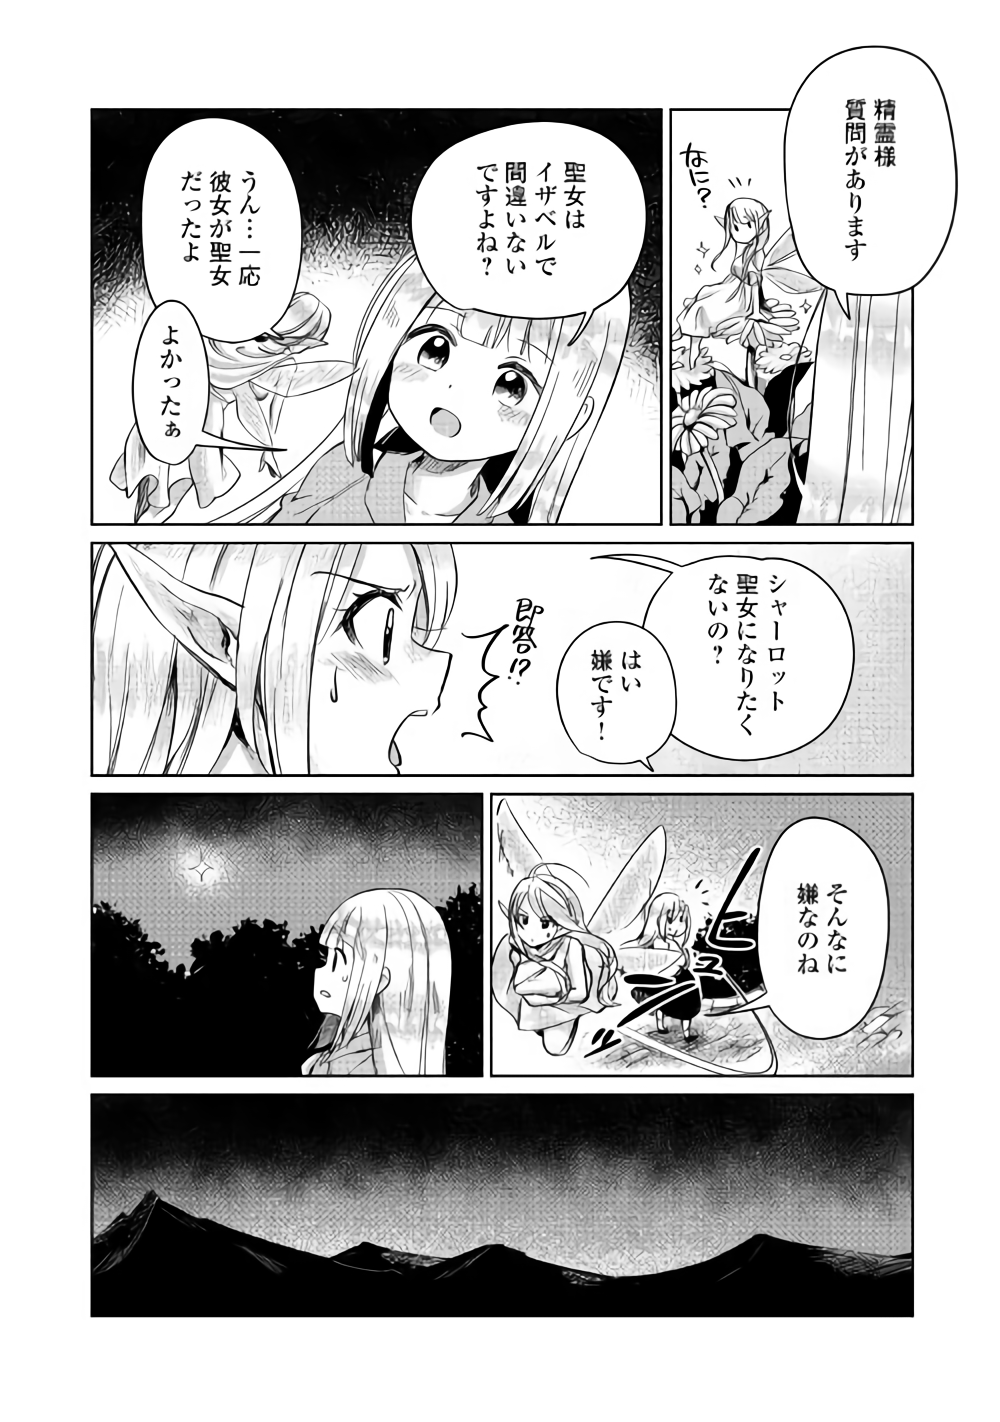 The Former Structural Researcher’s Story of Otherworldly Adventure 第4話 - Page 7